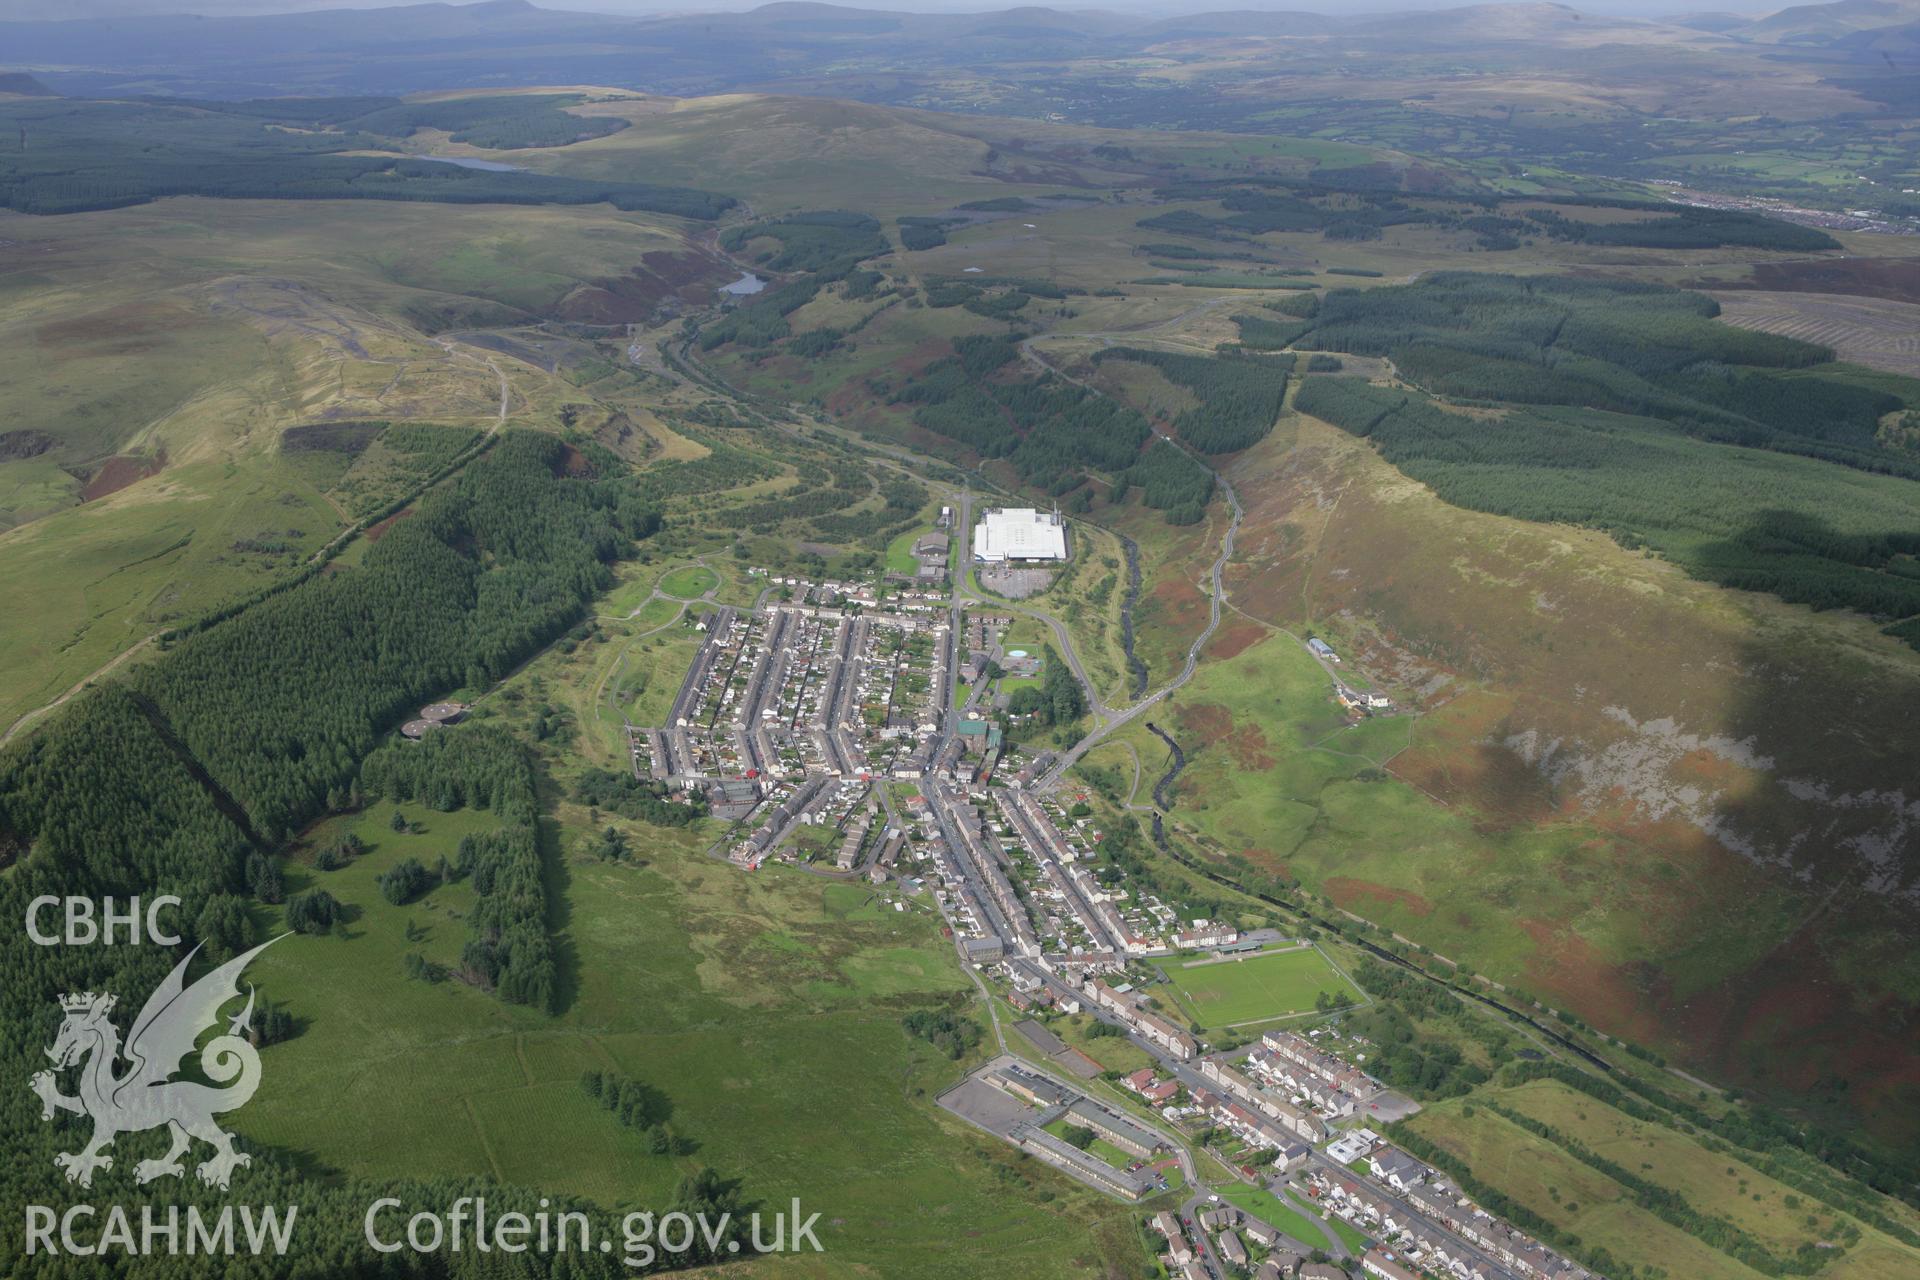 RCAHMW colour oblique photograph of Maerdy, from the south. Taken by Toby Driver on 12/09/2008.